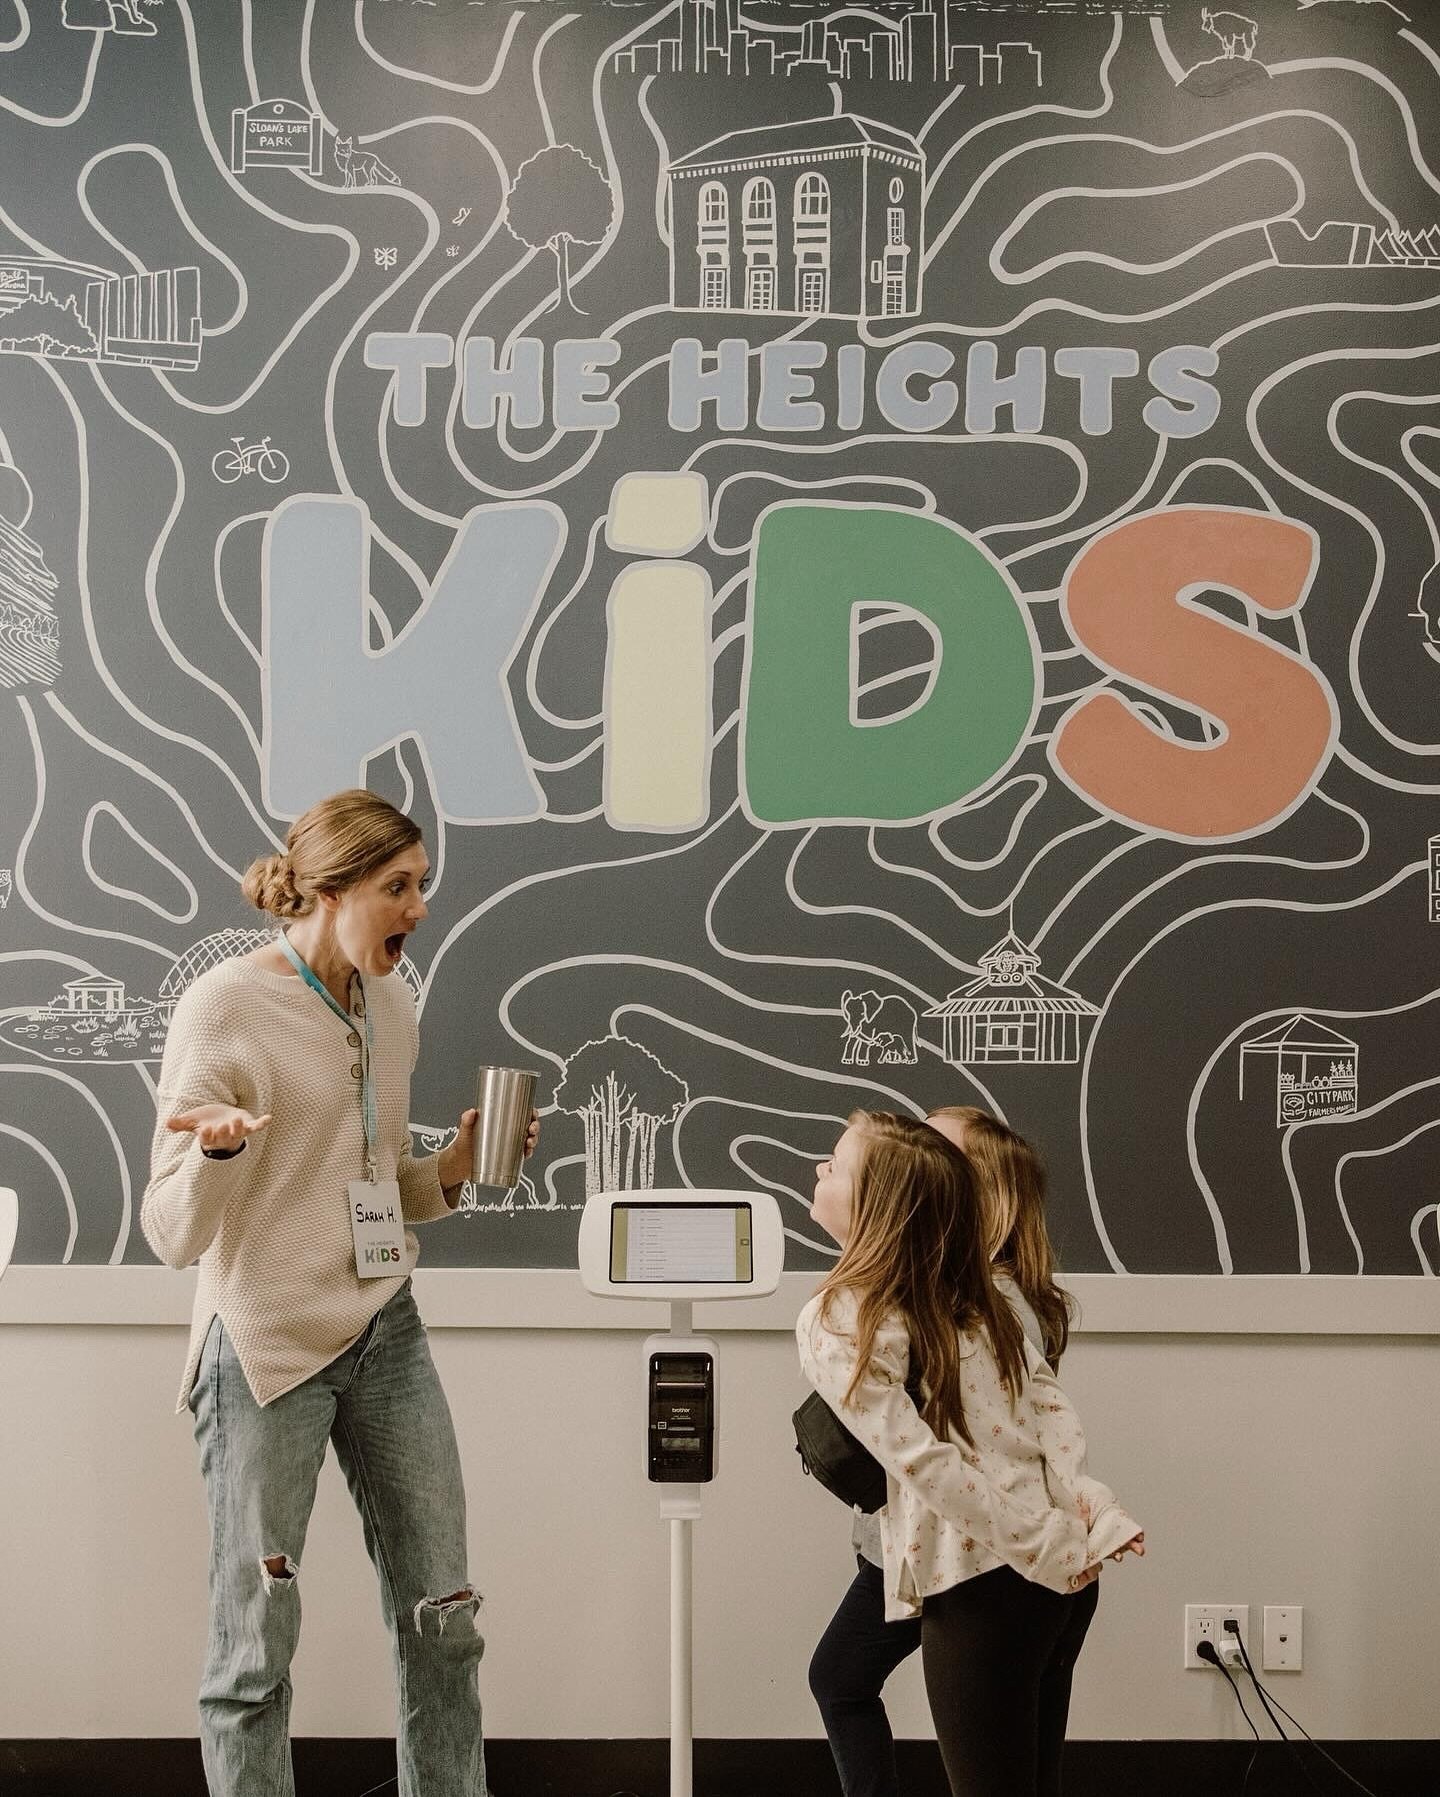 The Kingdom of God doesn&rsquo;t tolerate kids&hellip;it welcomes them! 

In fact, Jesus tells us that children are the best people to receive the good news of Gospel, and that we would all do better off becoming like them.

Every Sunday, our kids la